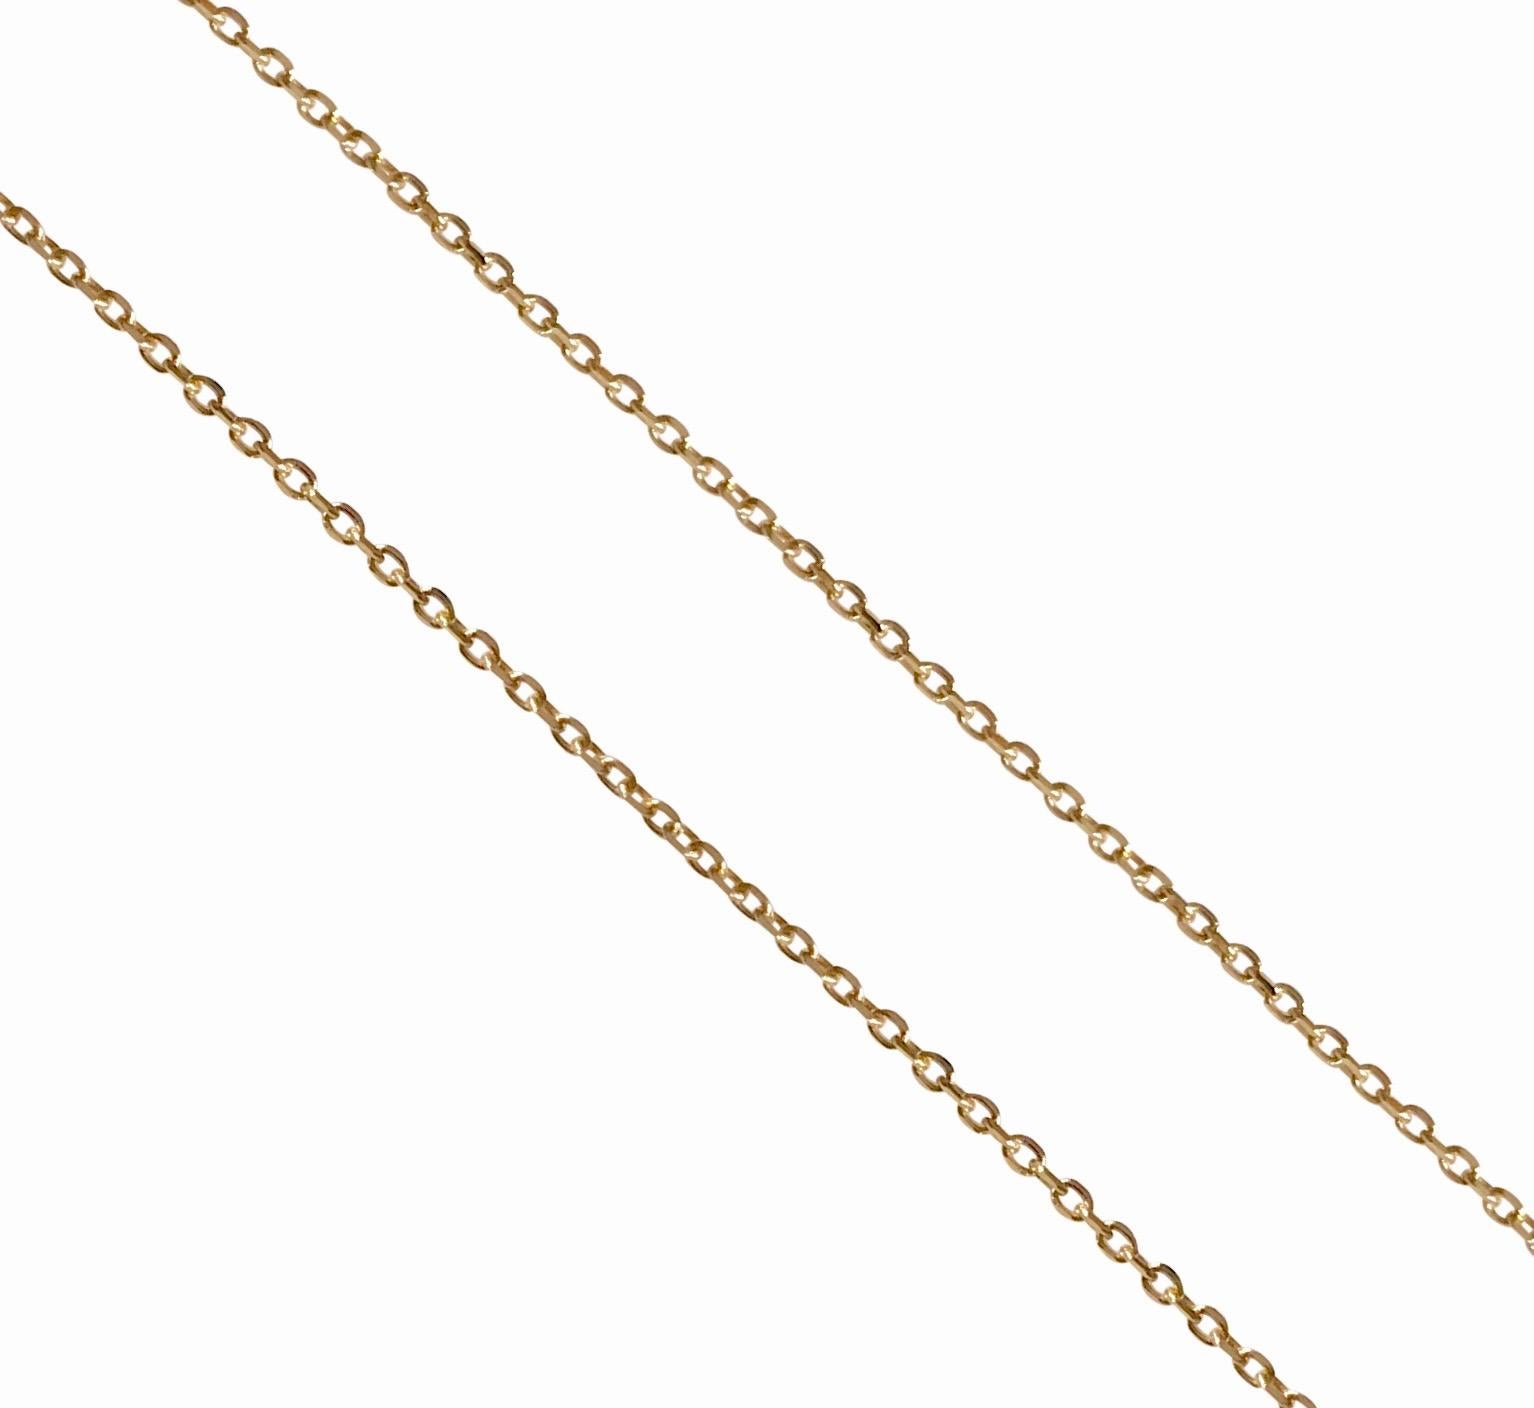 Fine 18Karat solid yellow gold chain.
Ideal to wear with pendants.
Weight: 1.68 g
Length : 43.00 cm 
Gauge:  0.7 mm
Hallmark: London’s Goldsmiths’ Company –  Assay Office ( laser mark ) 
All our jewellery are new and have never been previously owned